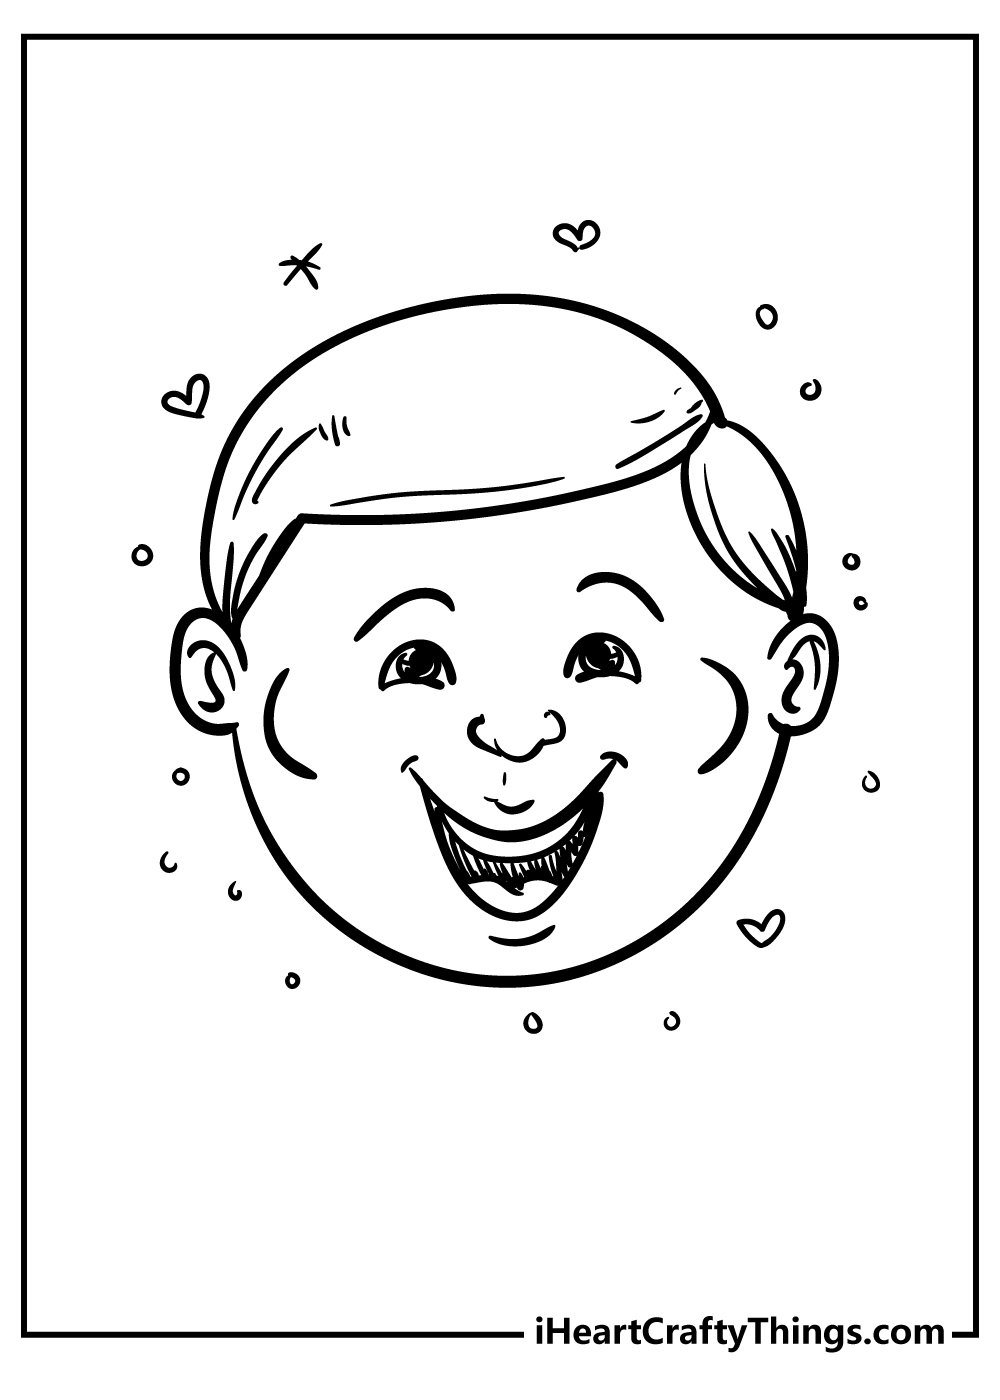 Happy Coloring Book for adults free download